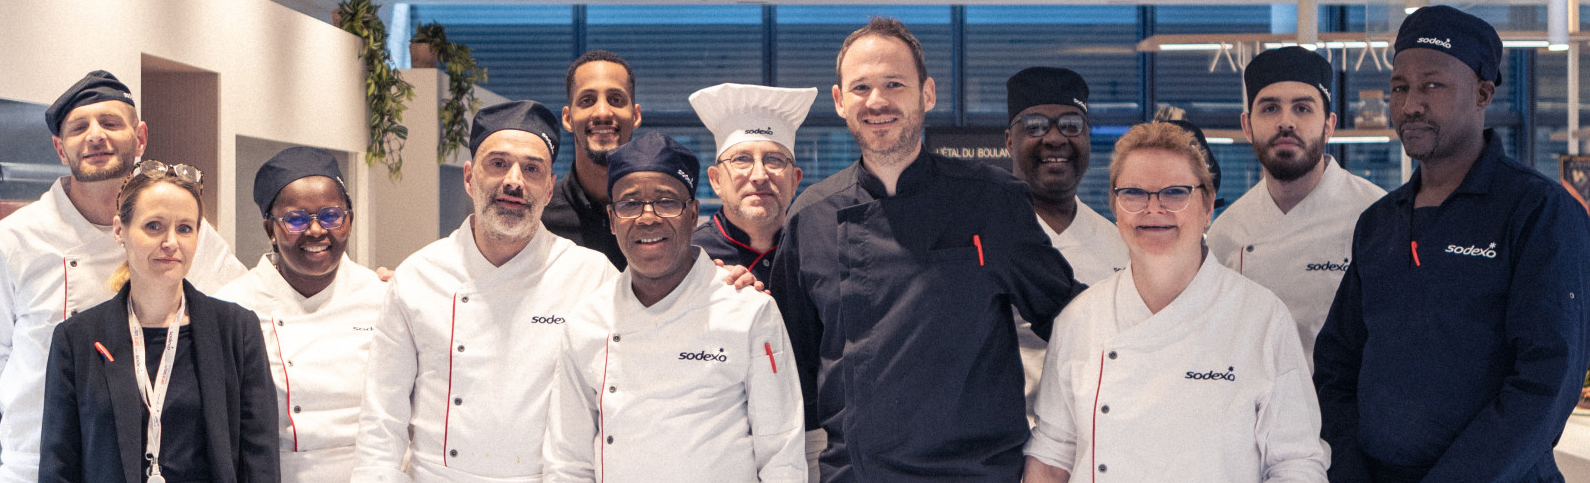 Diverse team of Sodexo workers